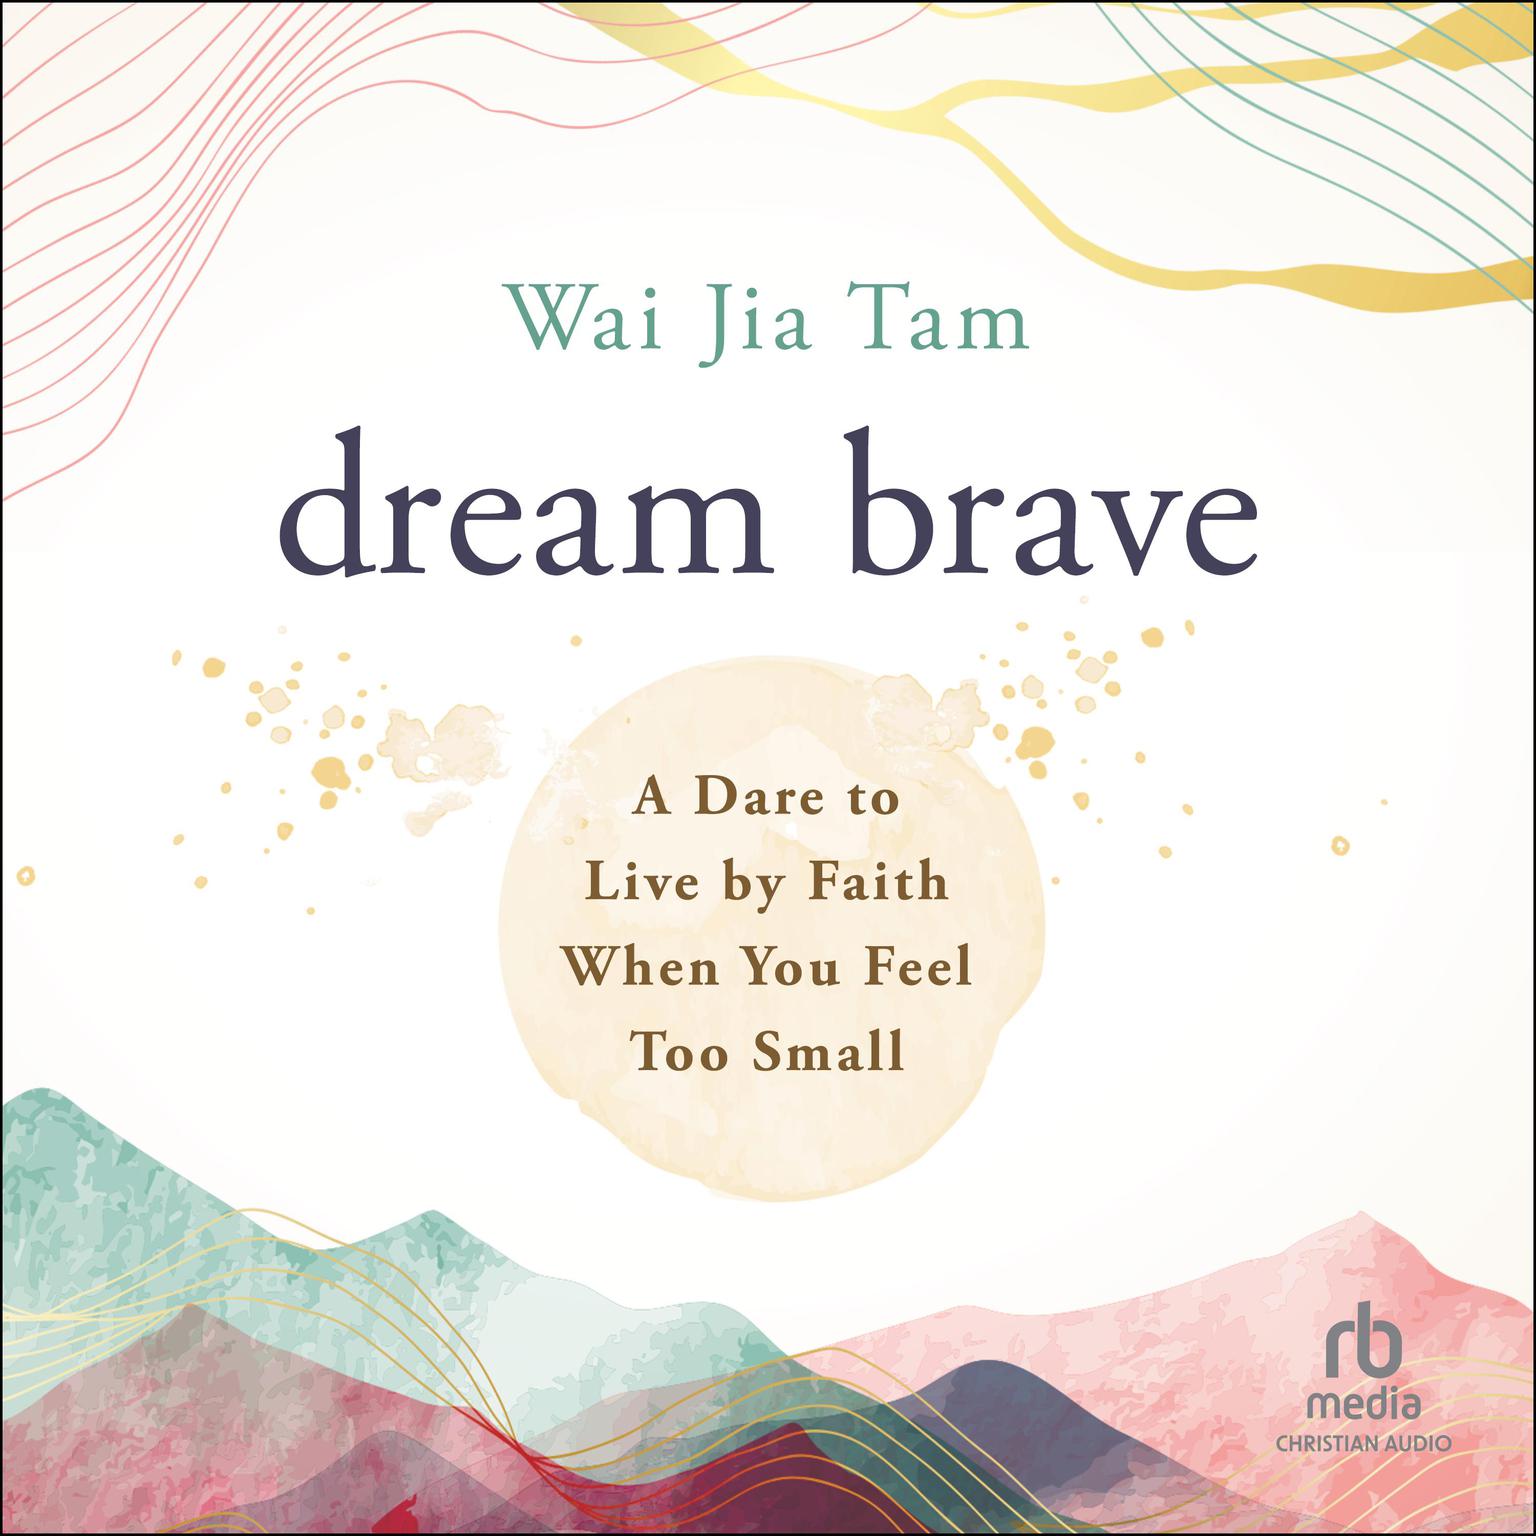 Dream Brave: A Dare to Live by Faith When You Feel Too Small Audiobook, by Wai Jia Tam